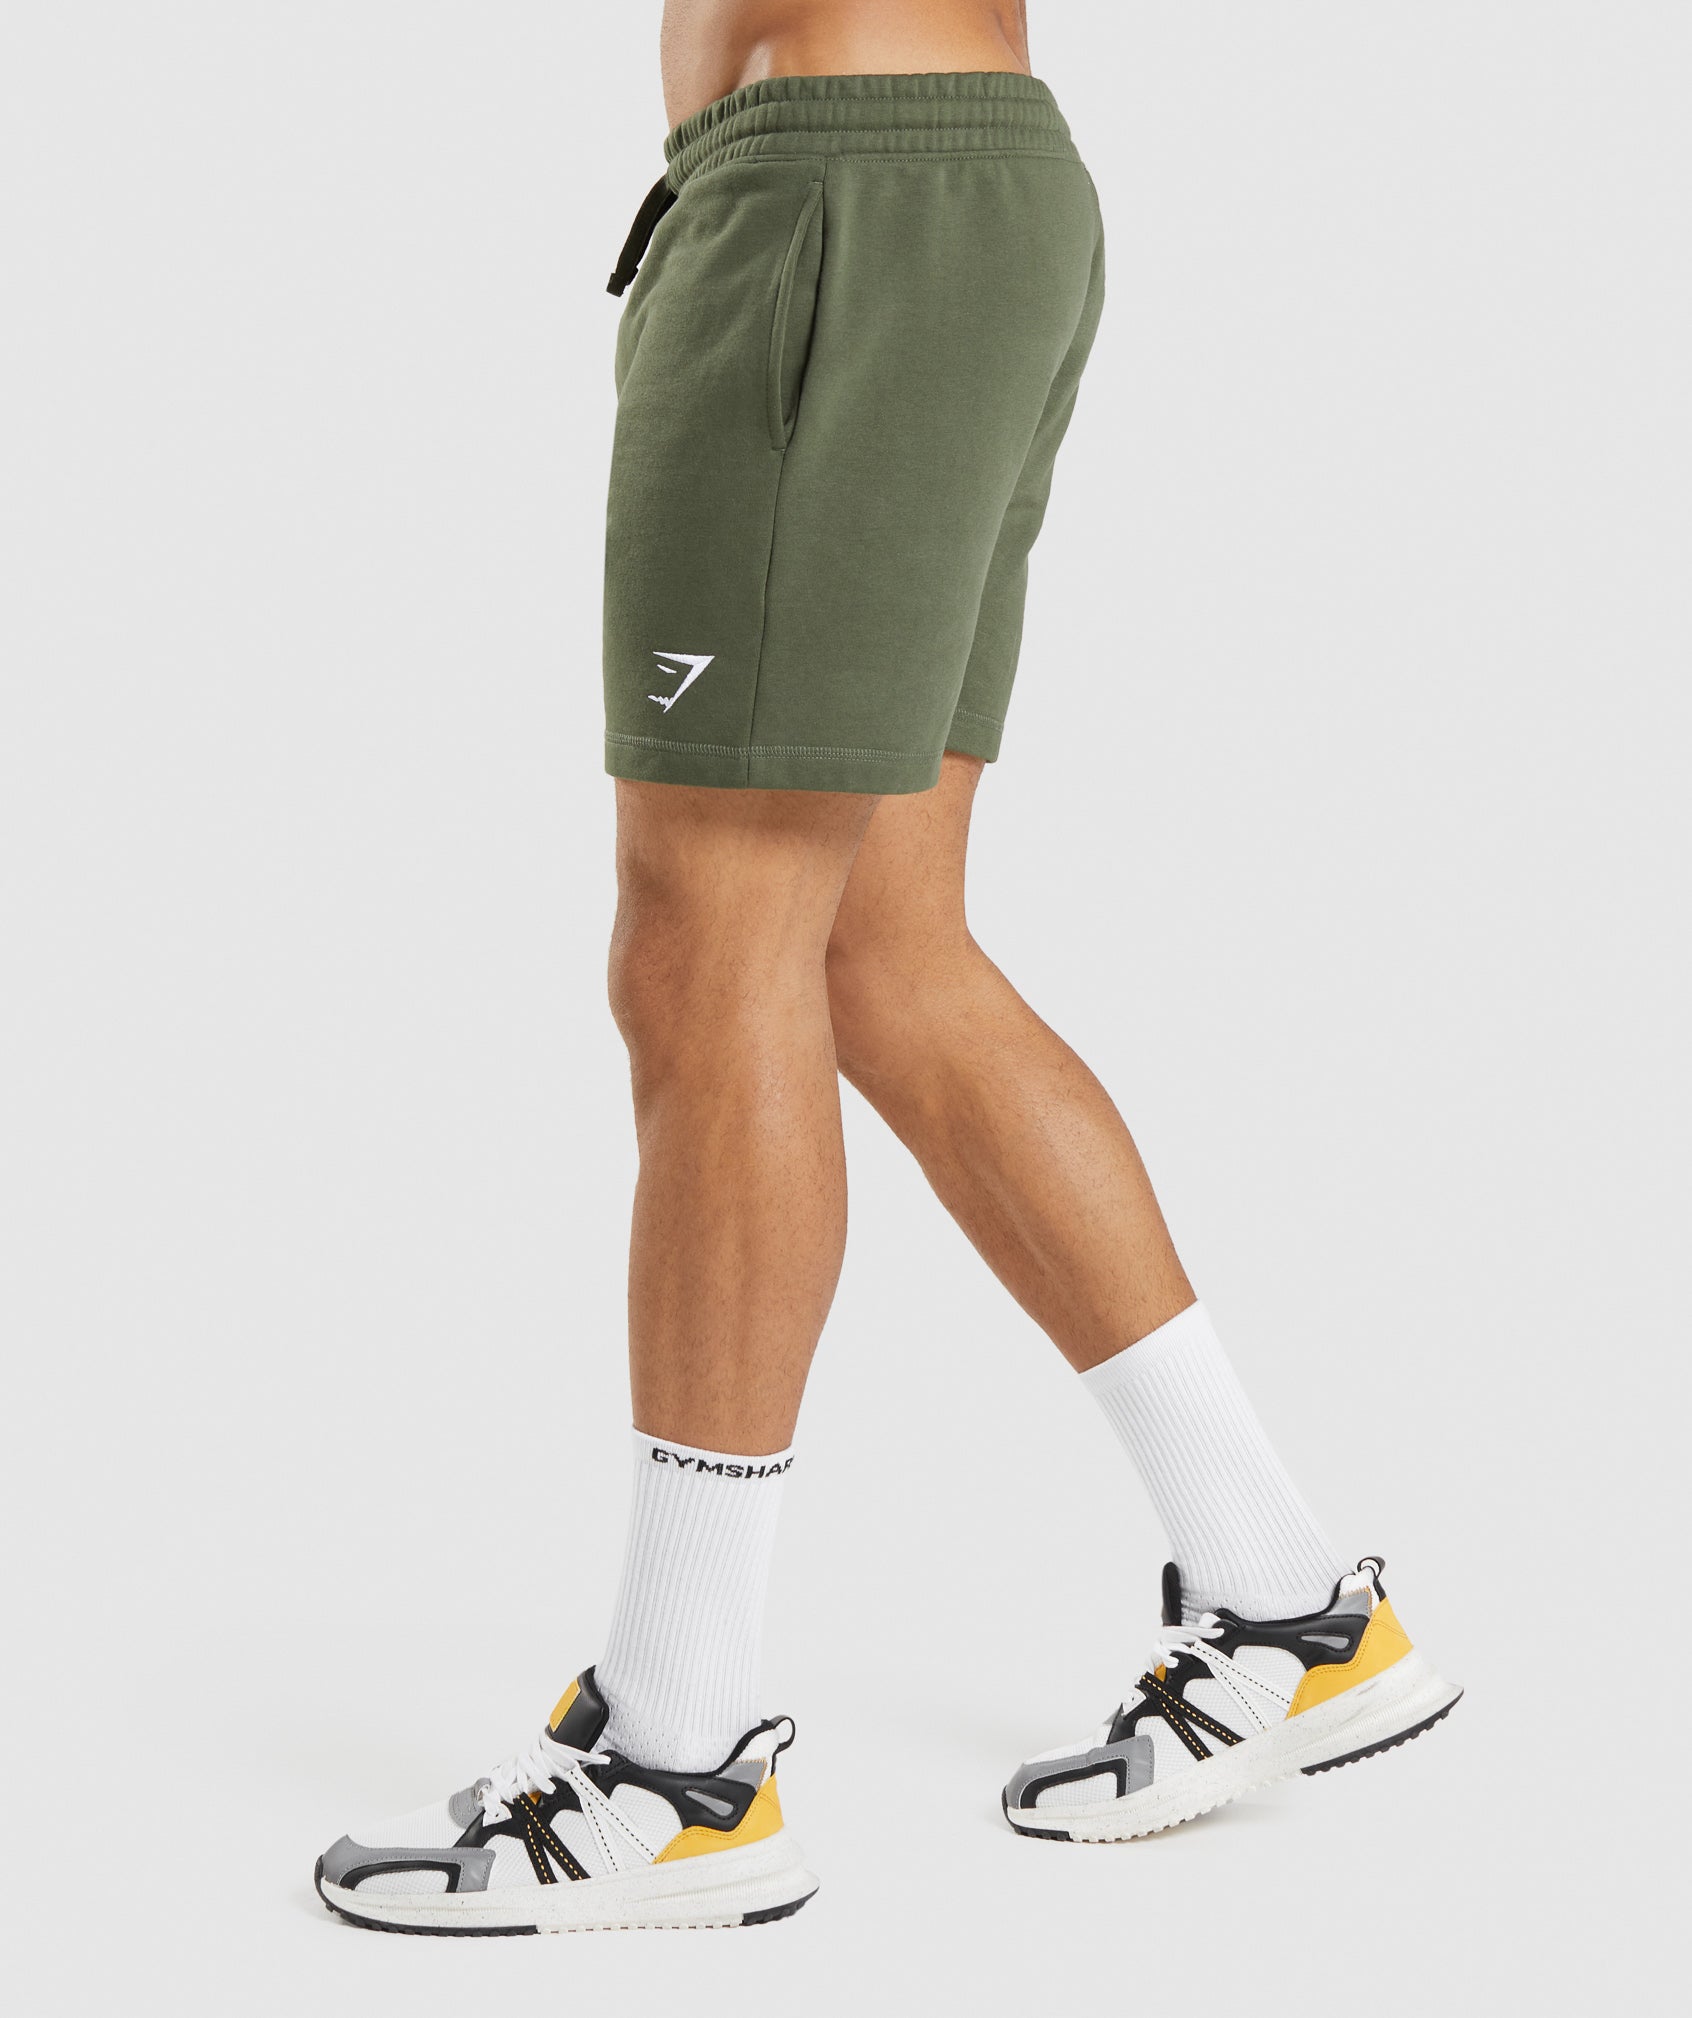 Crest Shorts in Core Olive - view 5